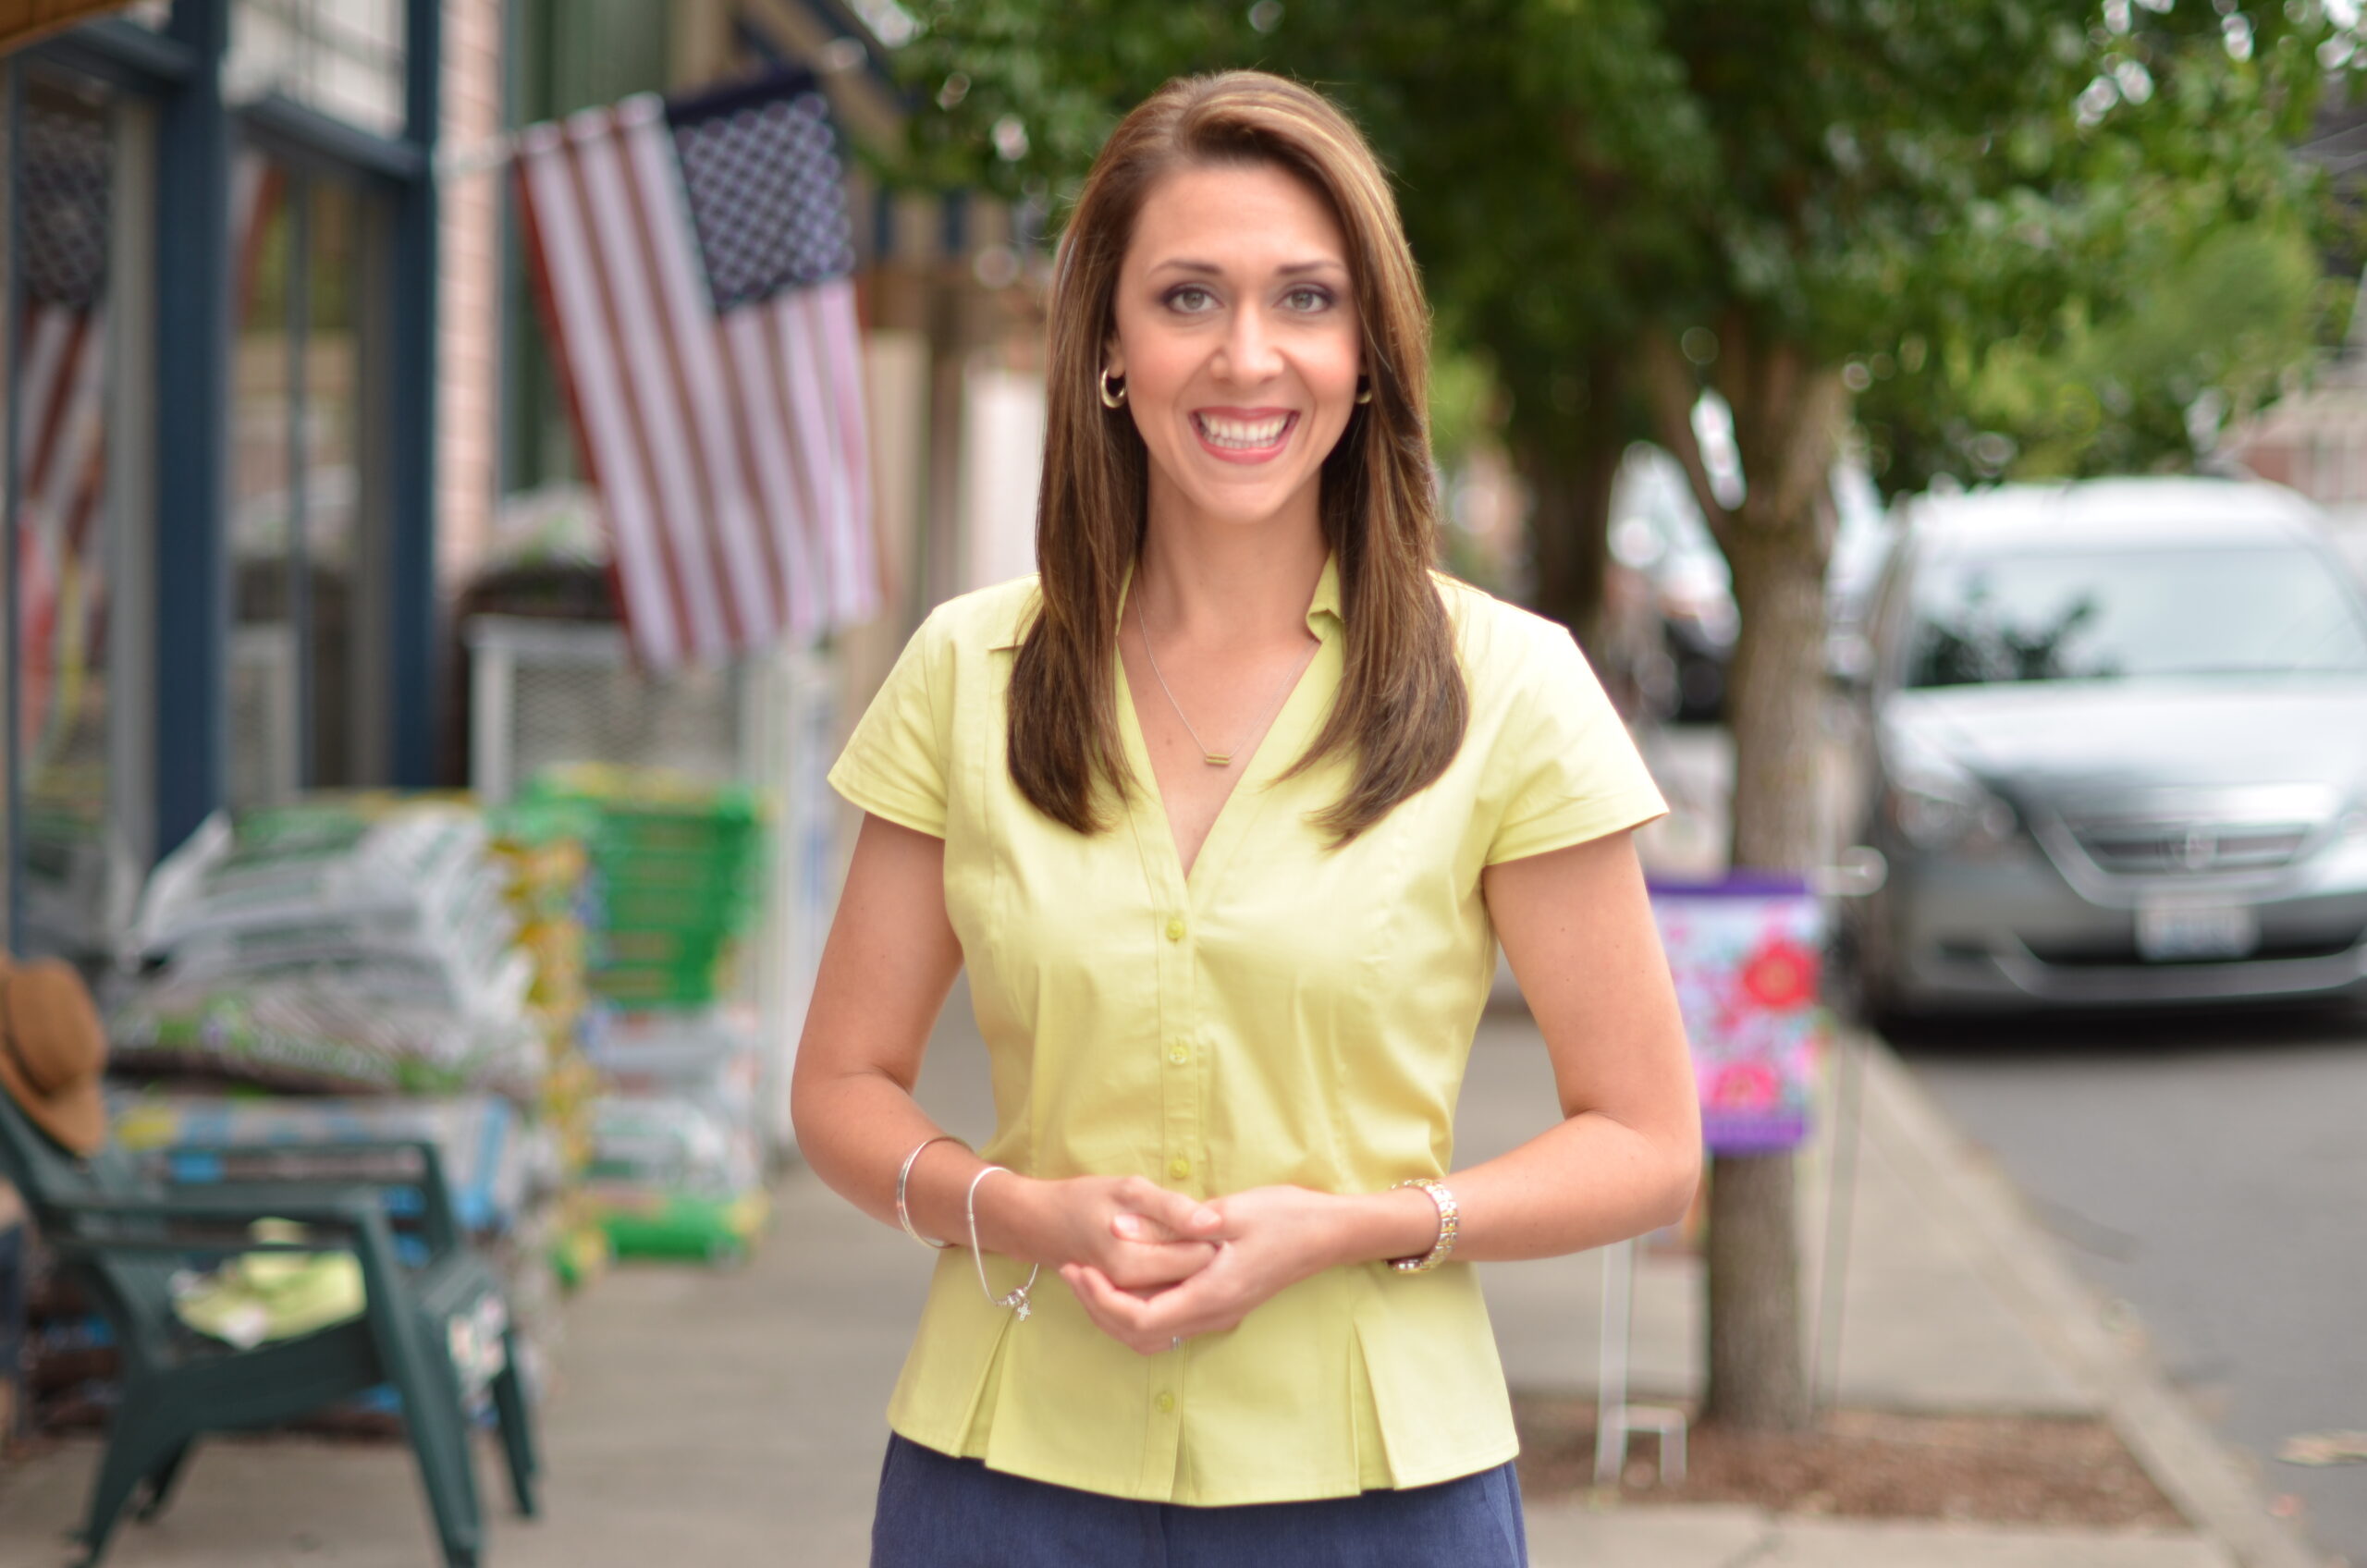 Jaime Herrera Beutler will be one of the Republicans